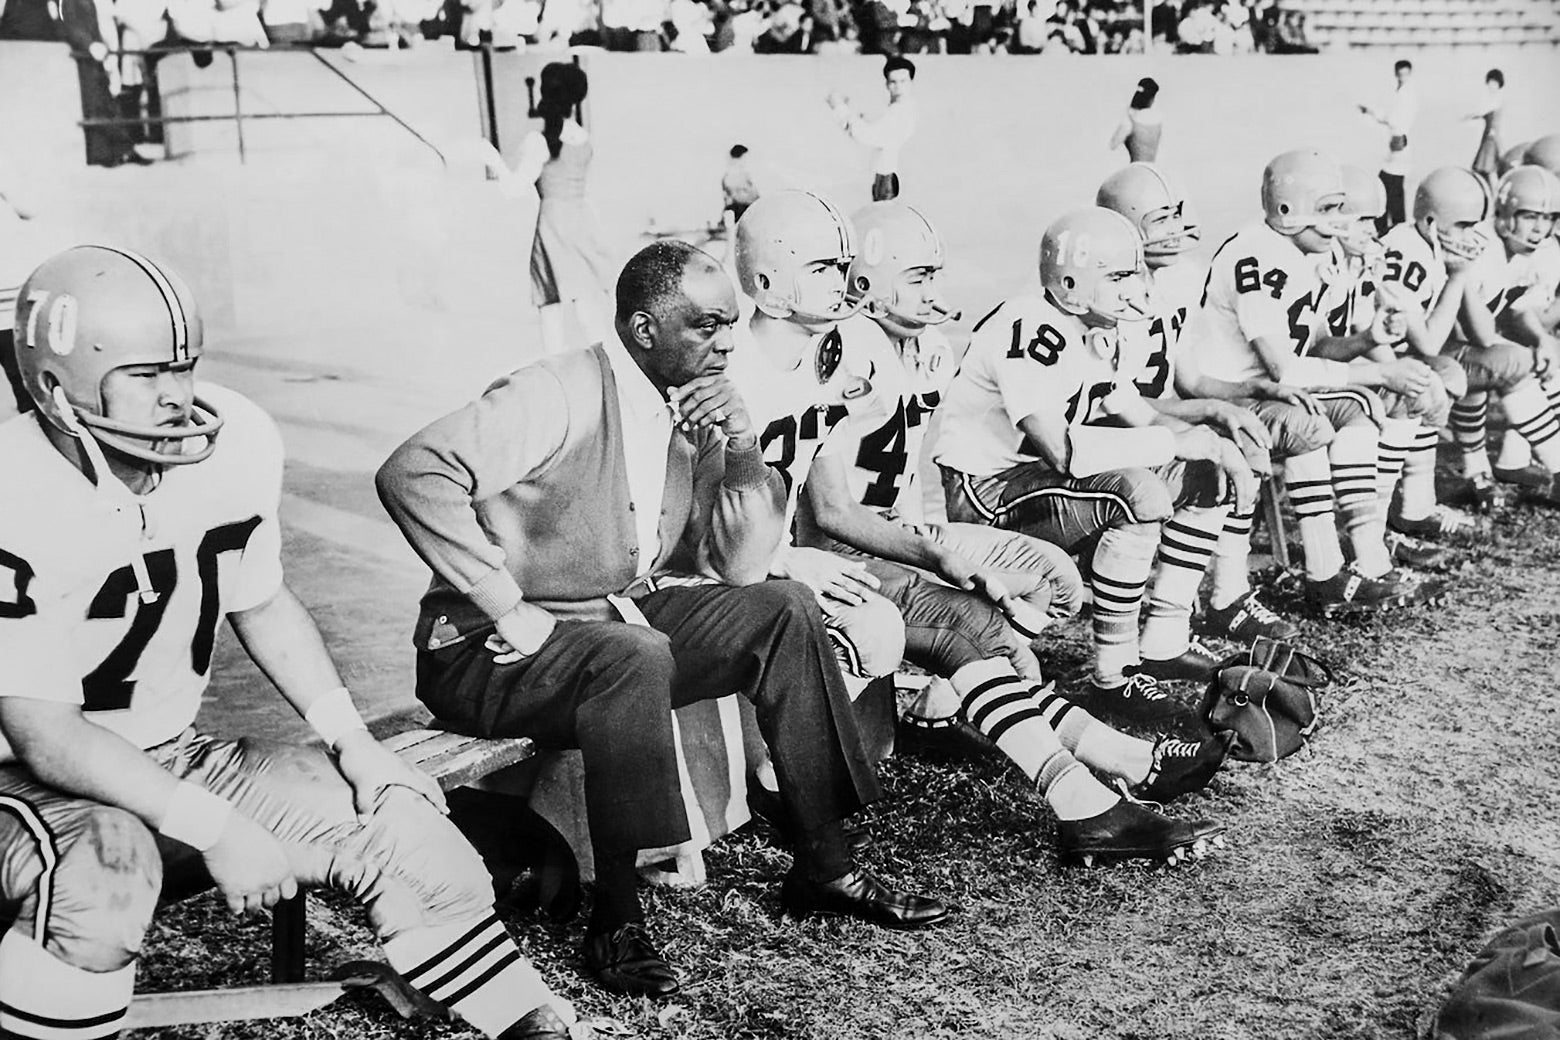 Washington as an older man in a cardigan and slacks sitting thoughtfully on a bench beside young uniformed football players during a game